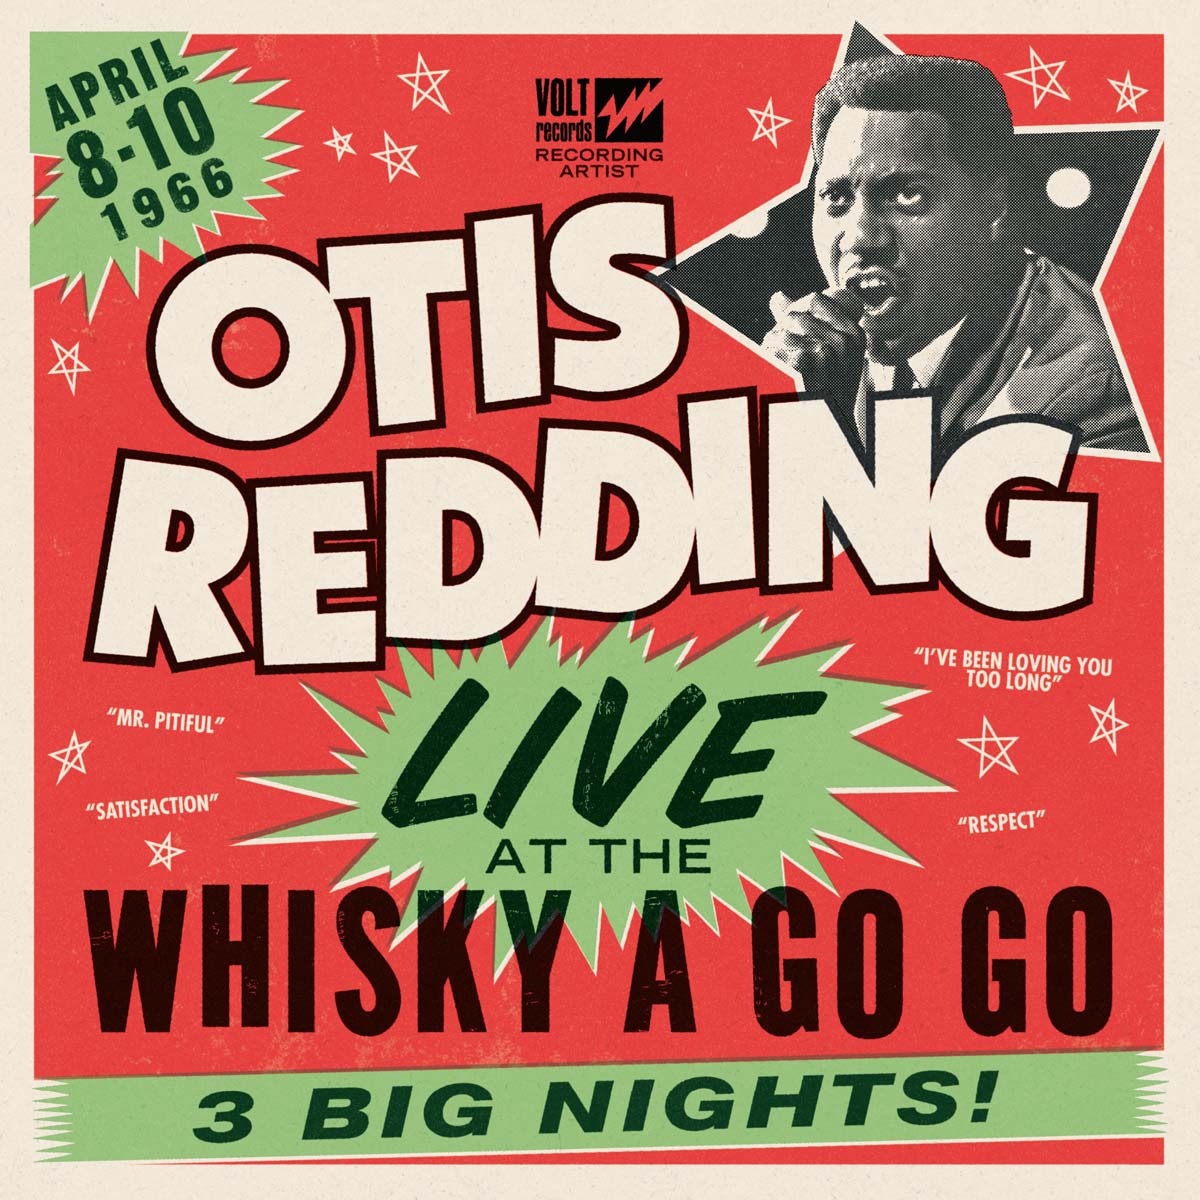 Featured image for “OTIS REDDING’s LIVE AT THE WHISKY A GO GO: THE COMPLETE RECORDINGS RECEIVES GRAMMY® AWARD FOR BEST ALBUM NOTES”